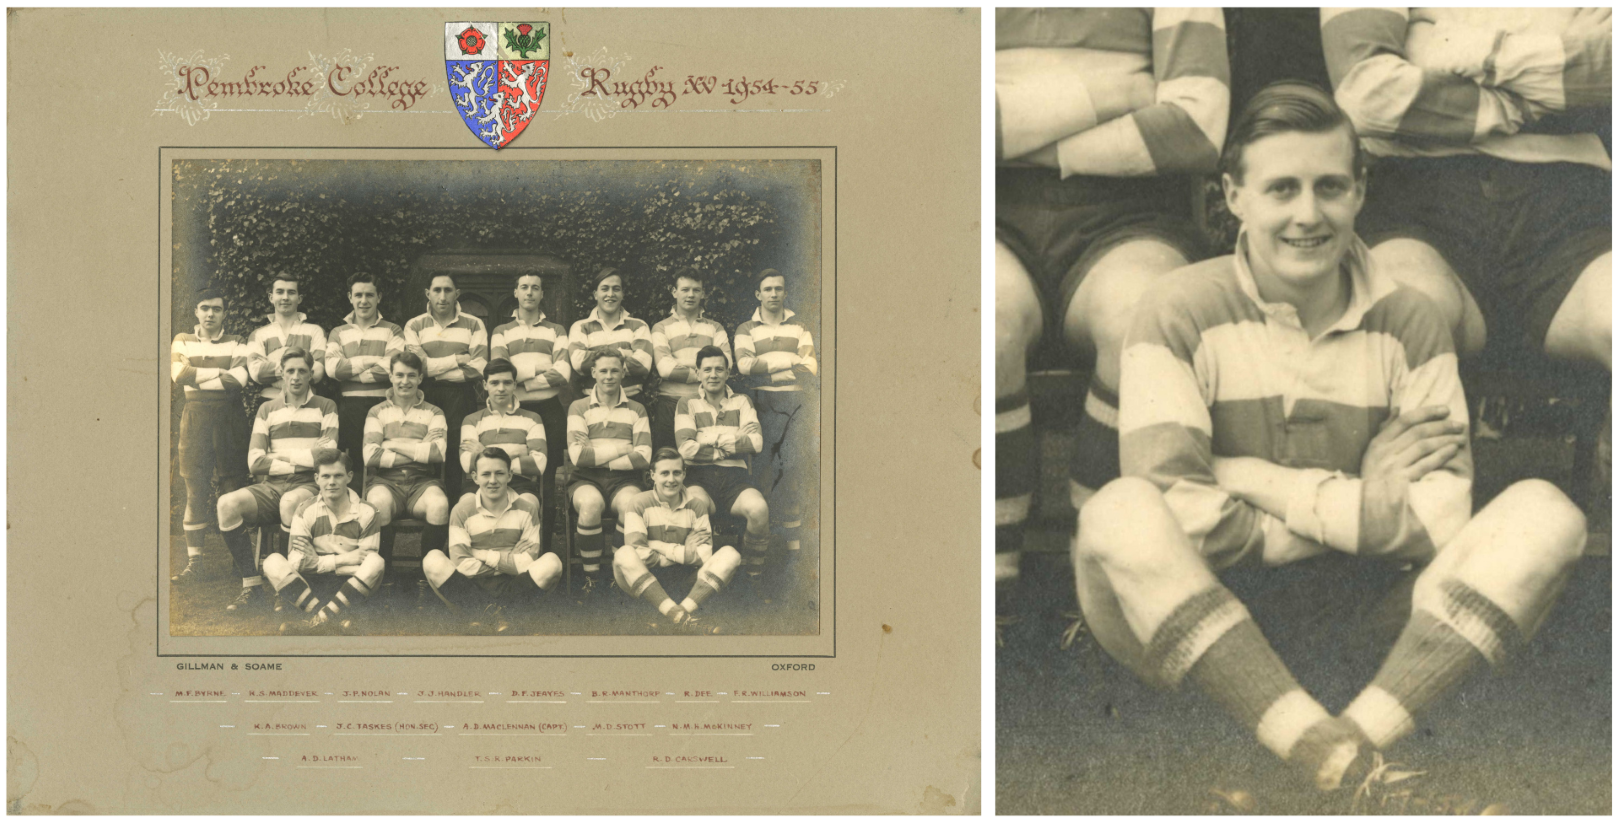 Carswell with Pembroke Rugby Team 1954-55